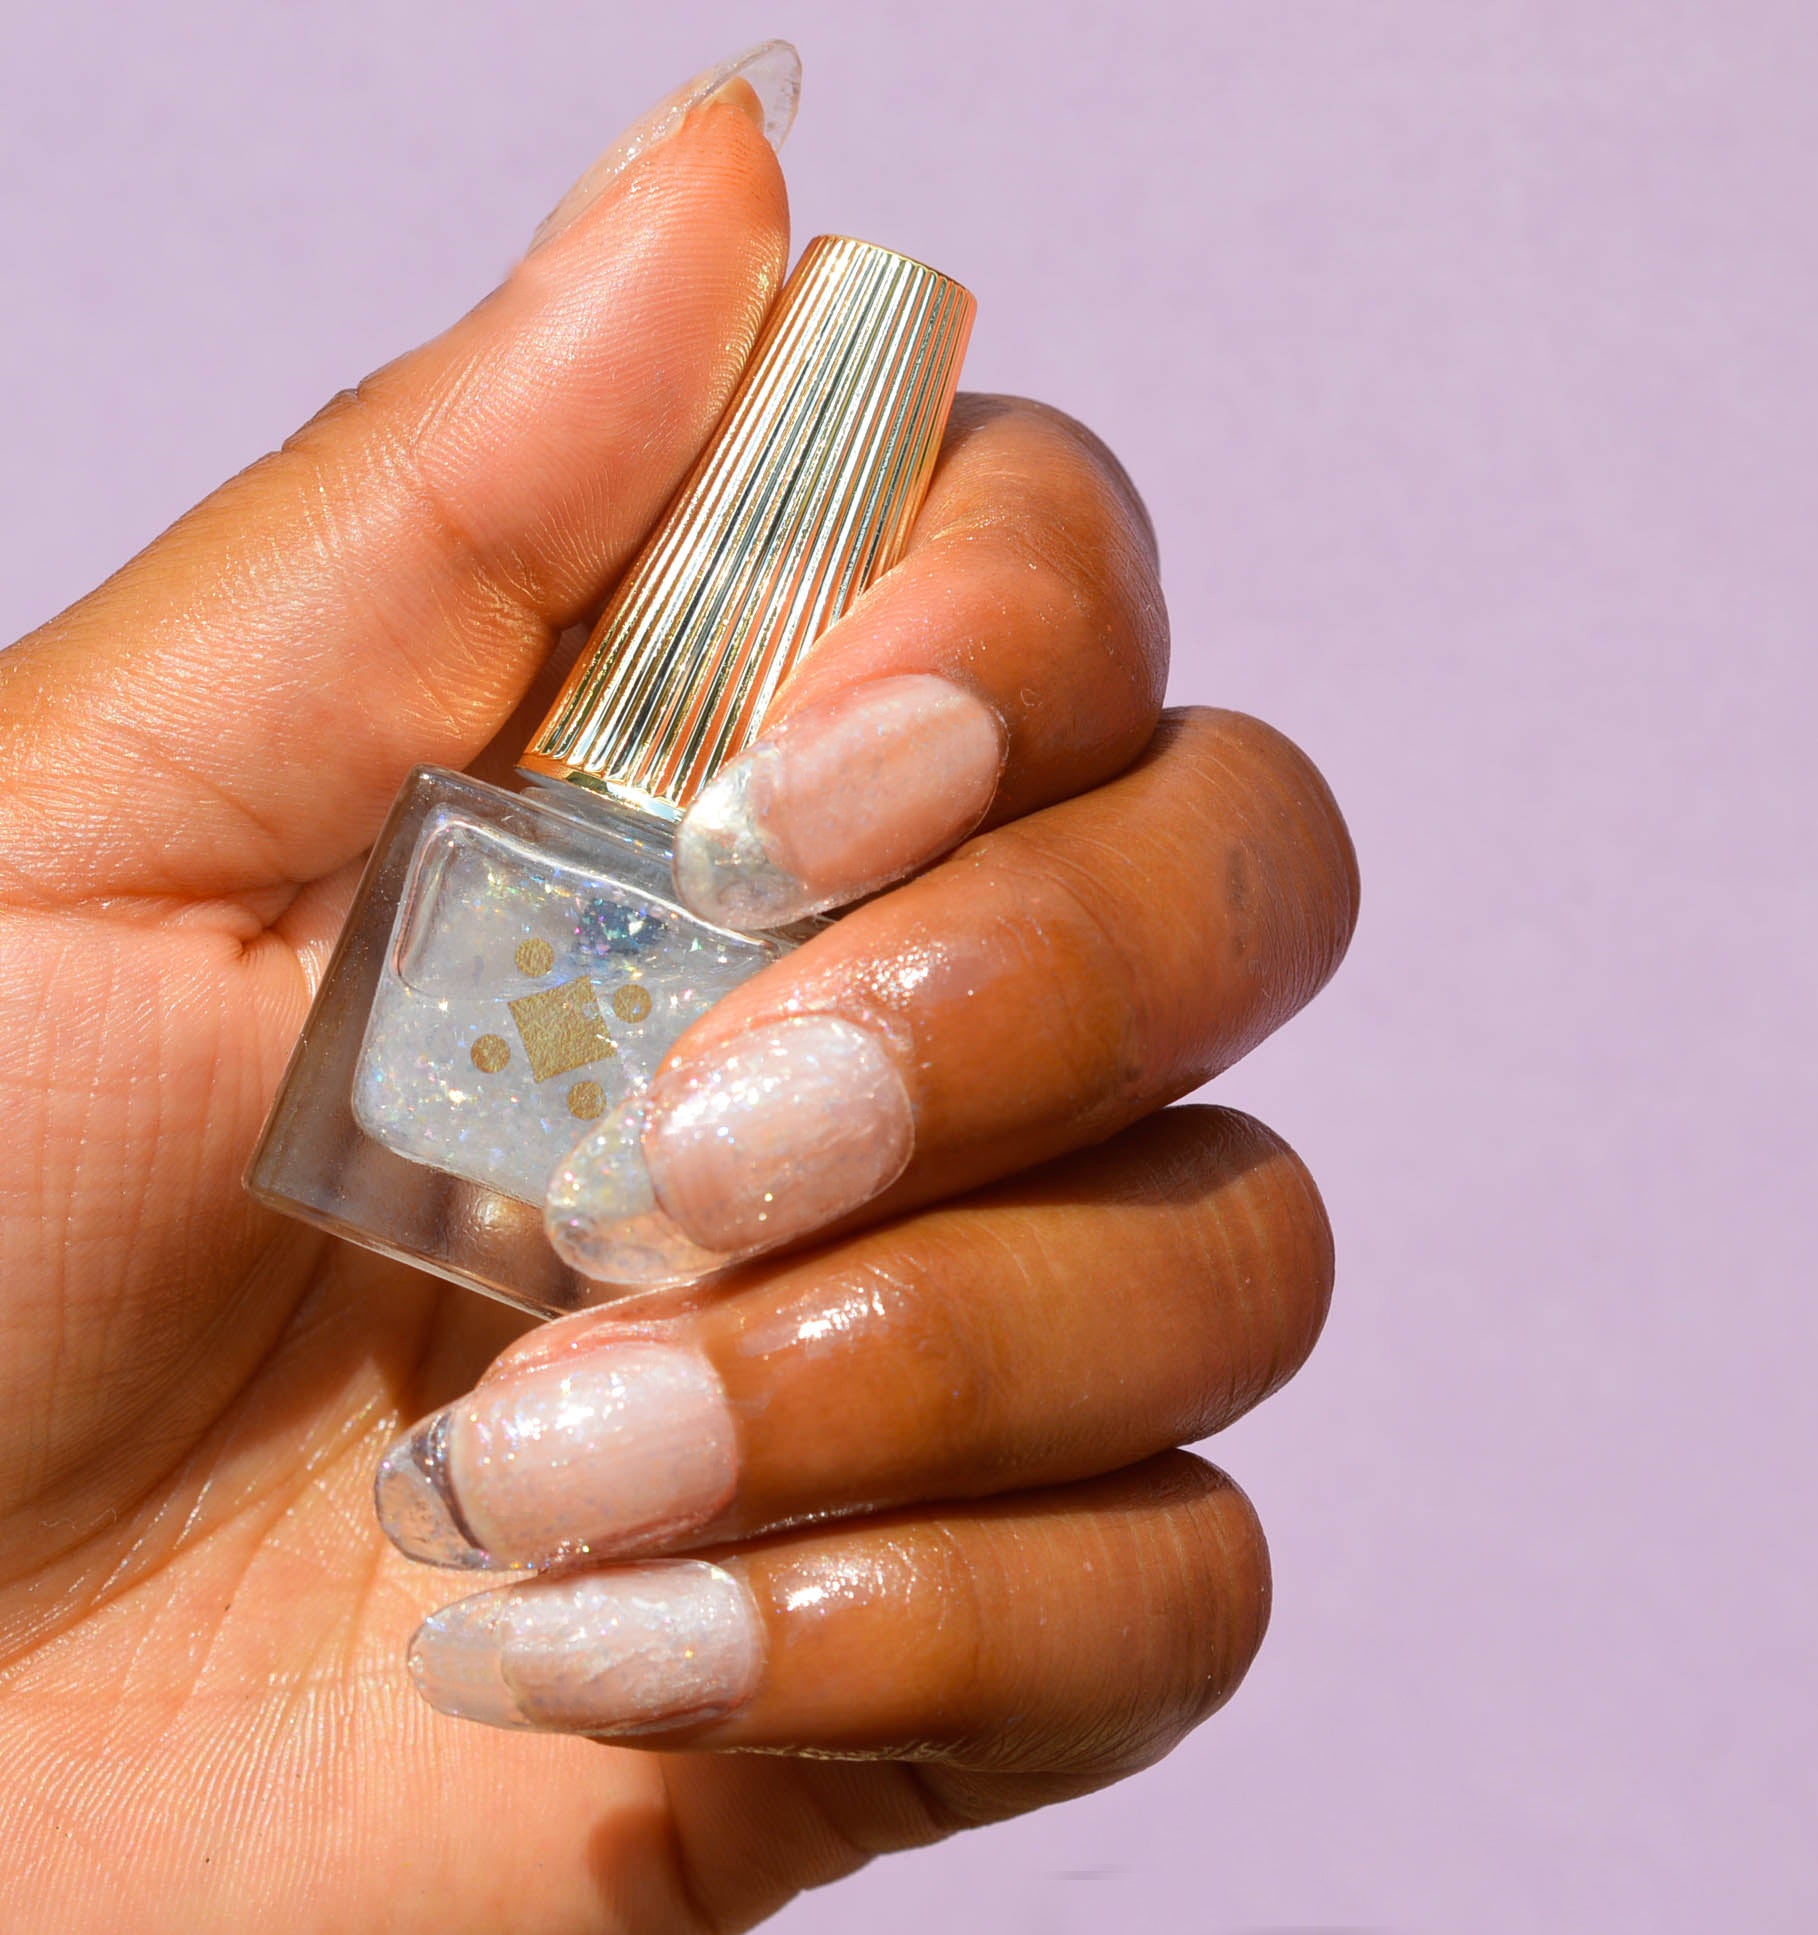 Sea Glass Nails Are The Latest Nail Art Trend | Glamour UK